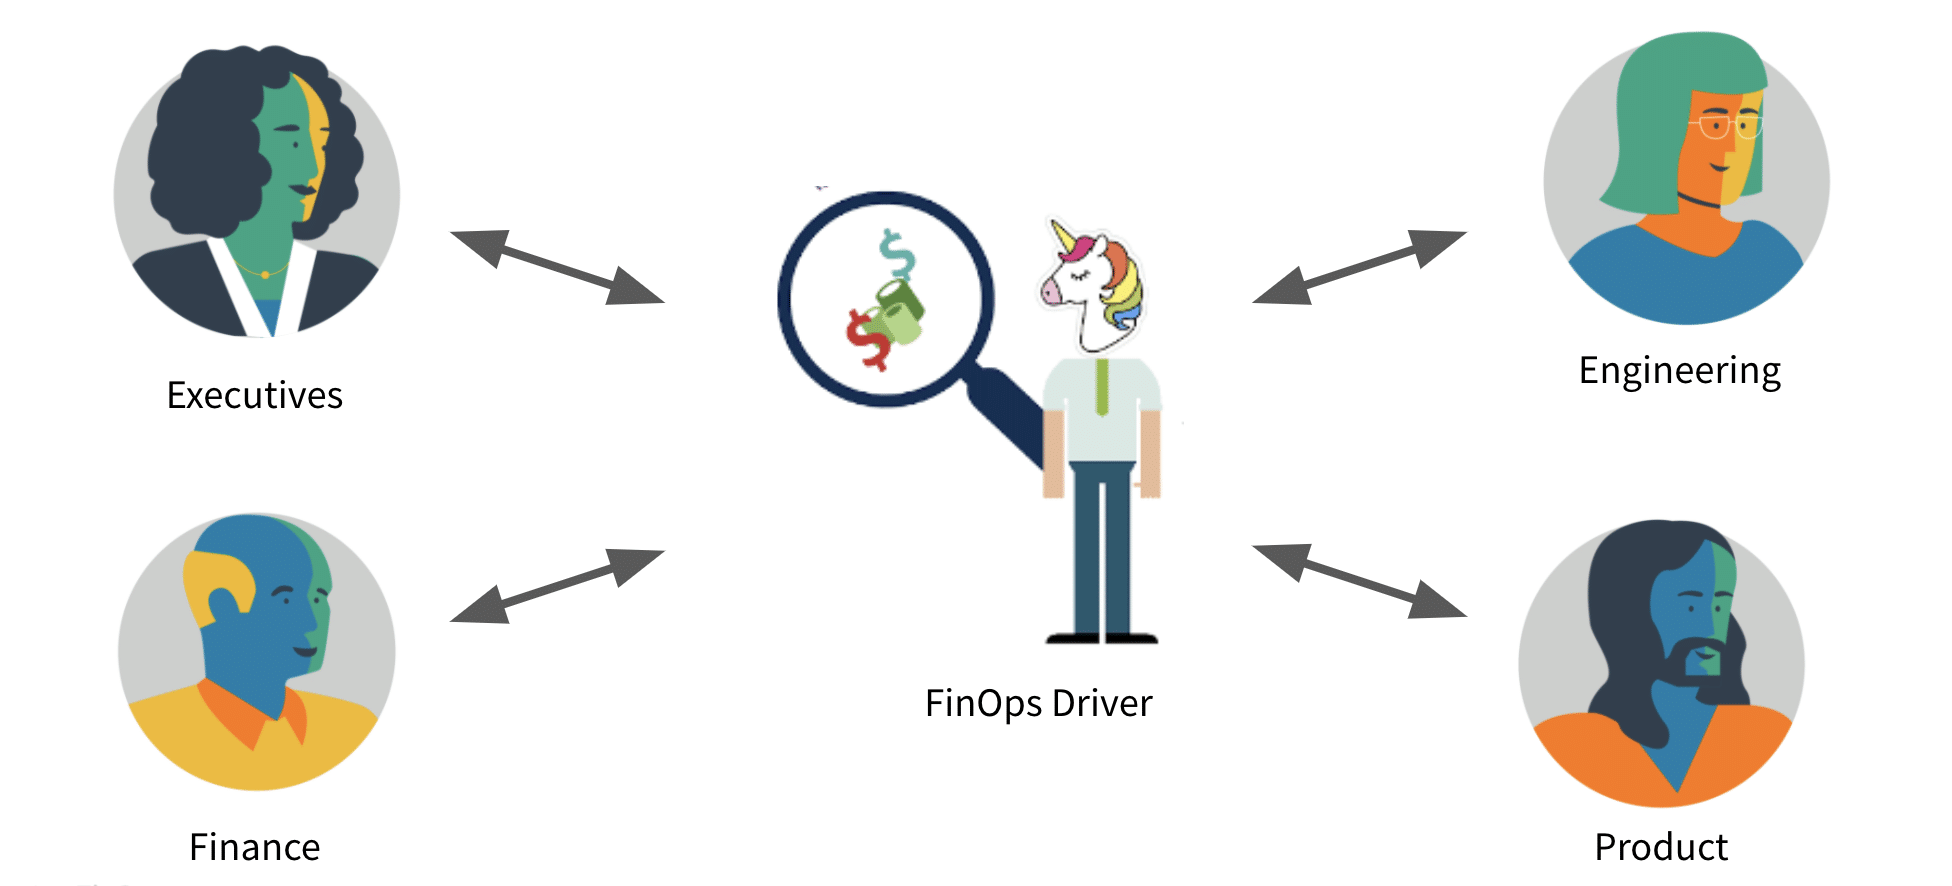 FinOps Accountability, Decision Structure, Cost Optimization, Framework, RACI, Economize, AWS, GCP, Azure, Drivers, Connections, Responsibilities